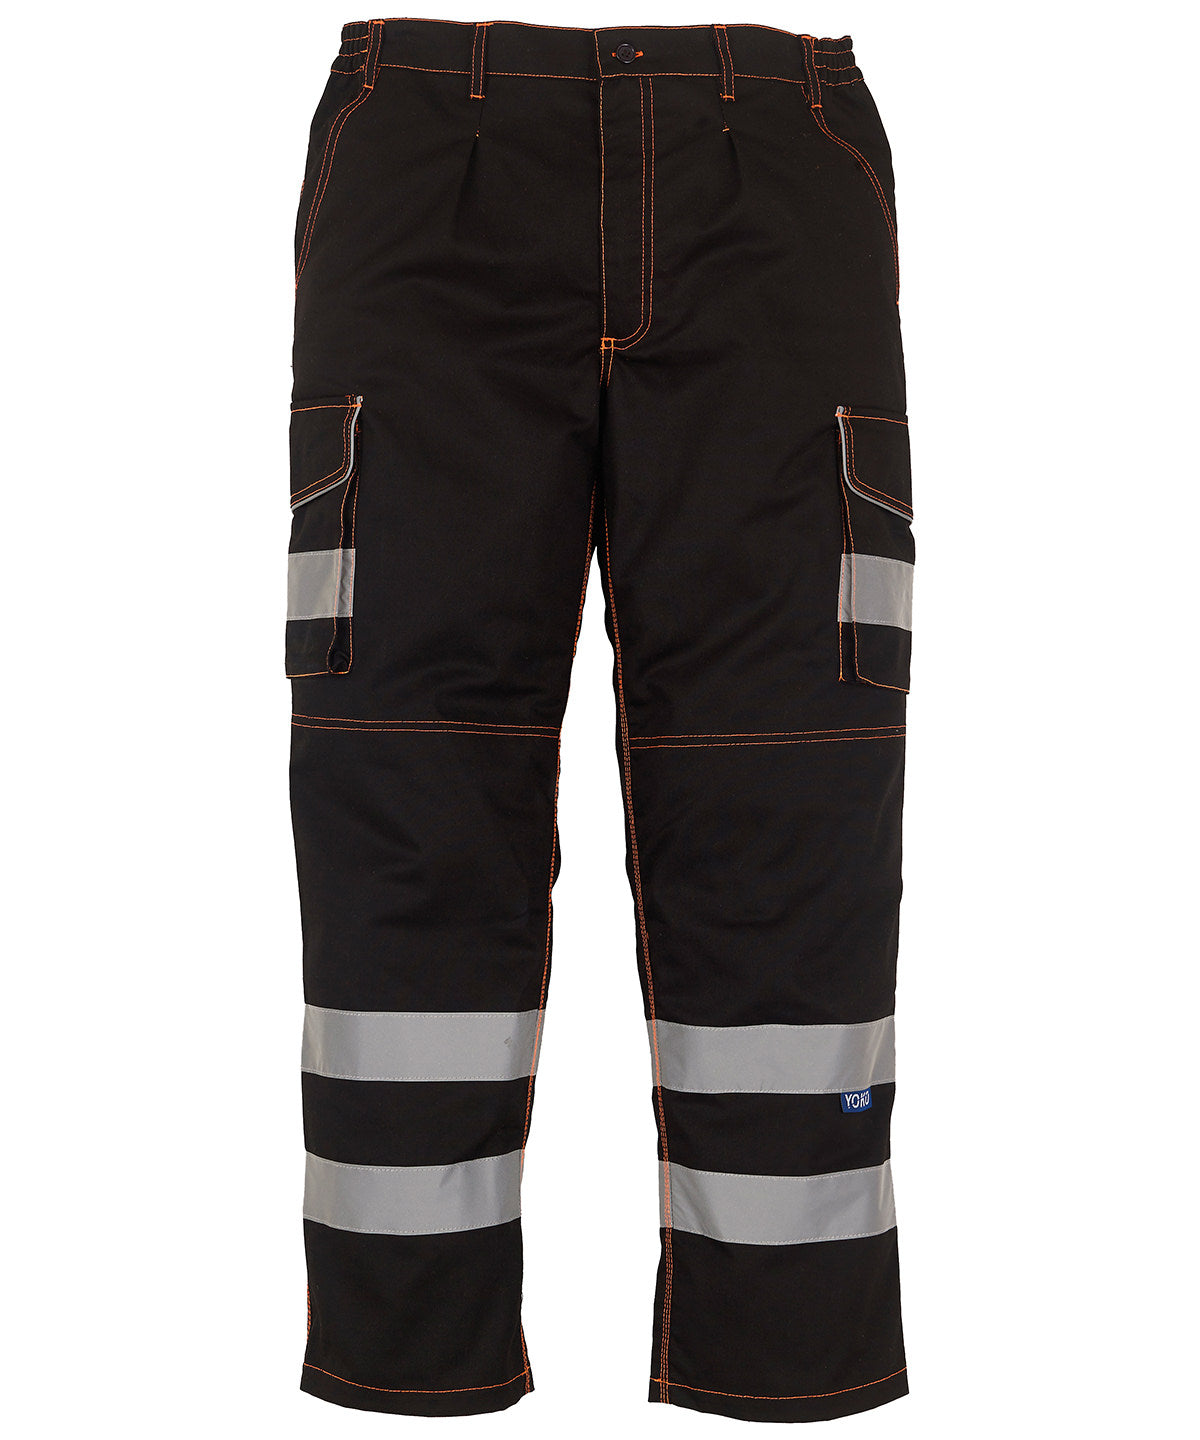 Hi-vis polycotton cargo trousers with kneepad pockets (HV018T/3M)